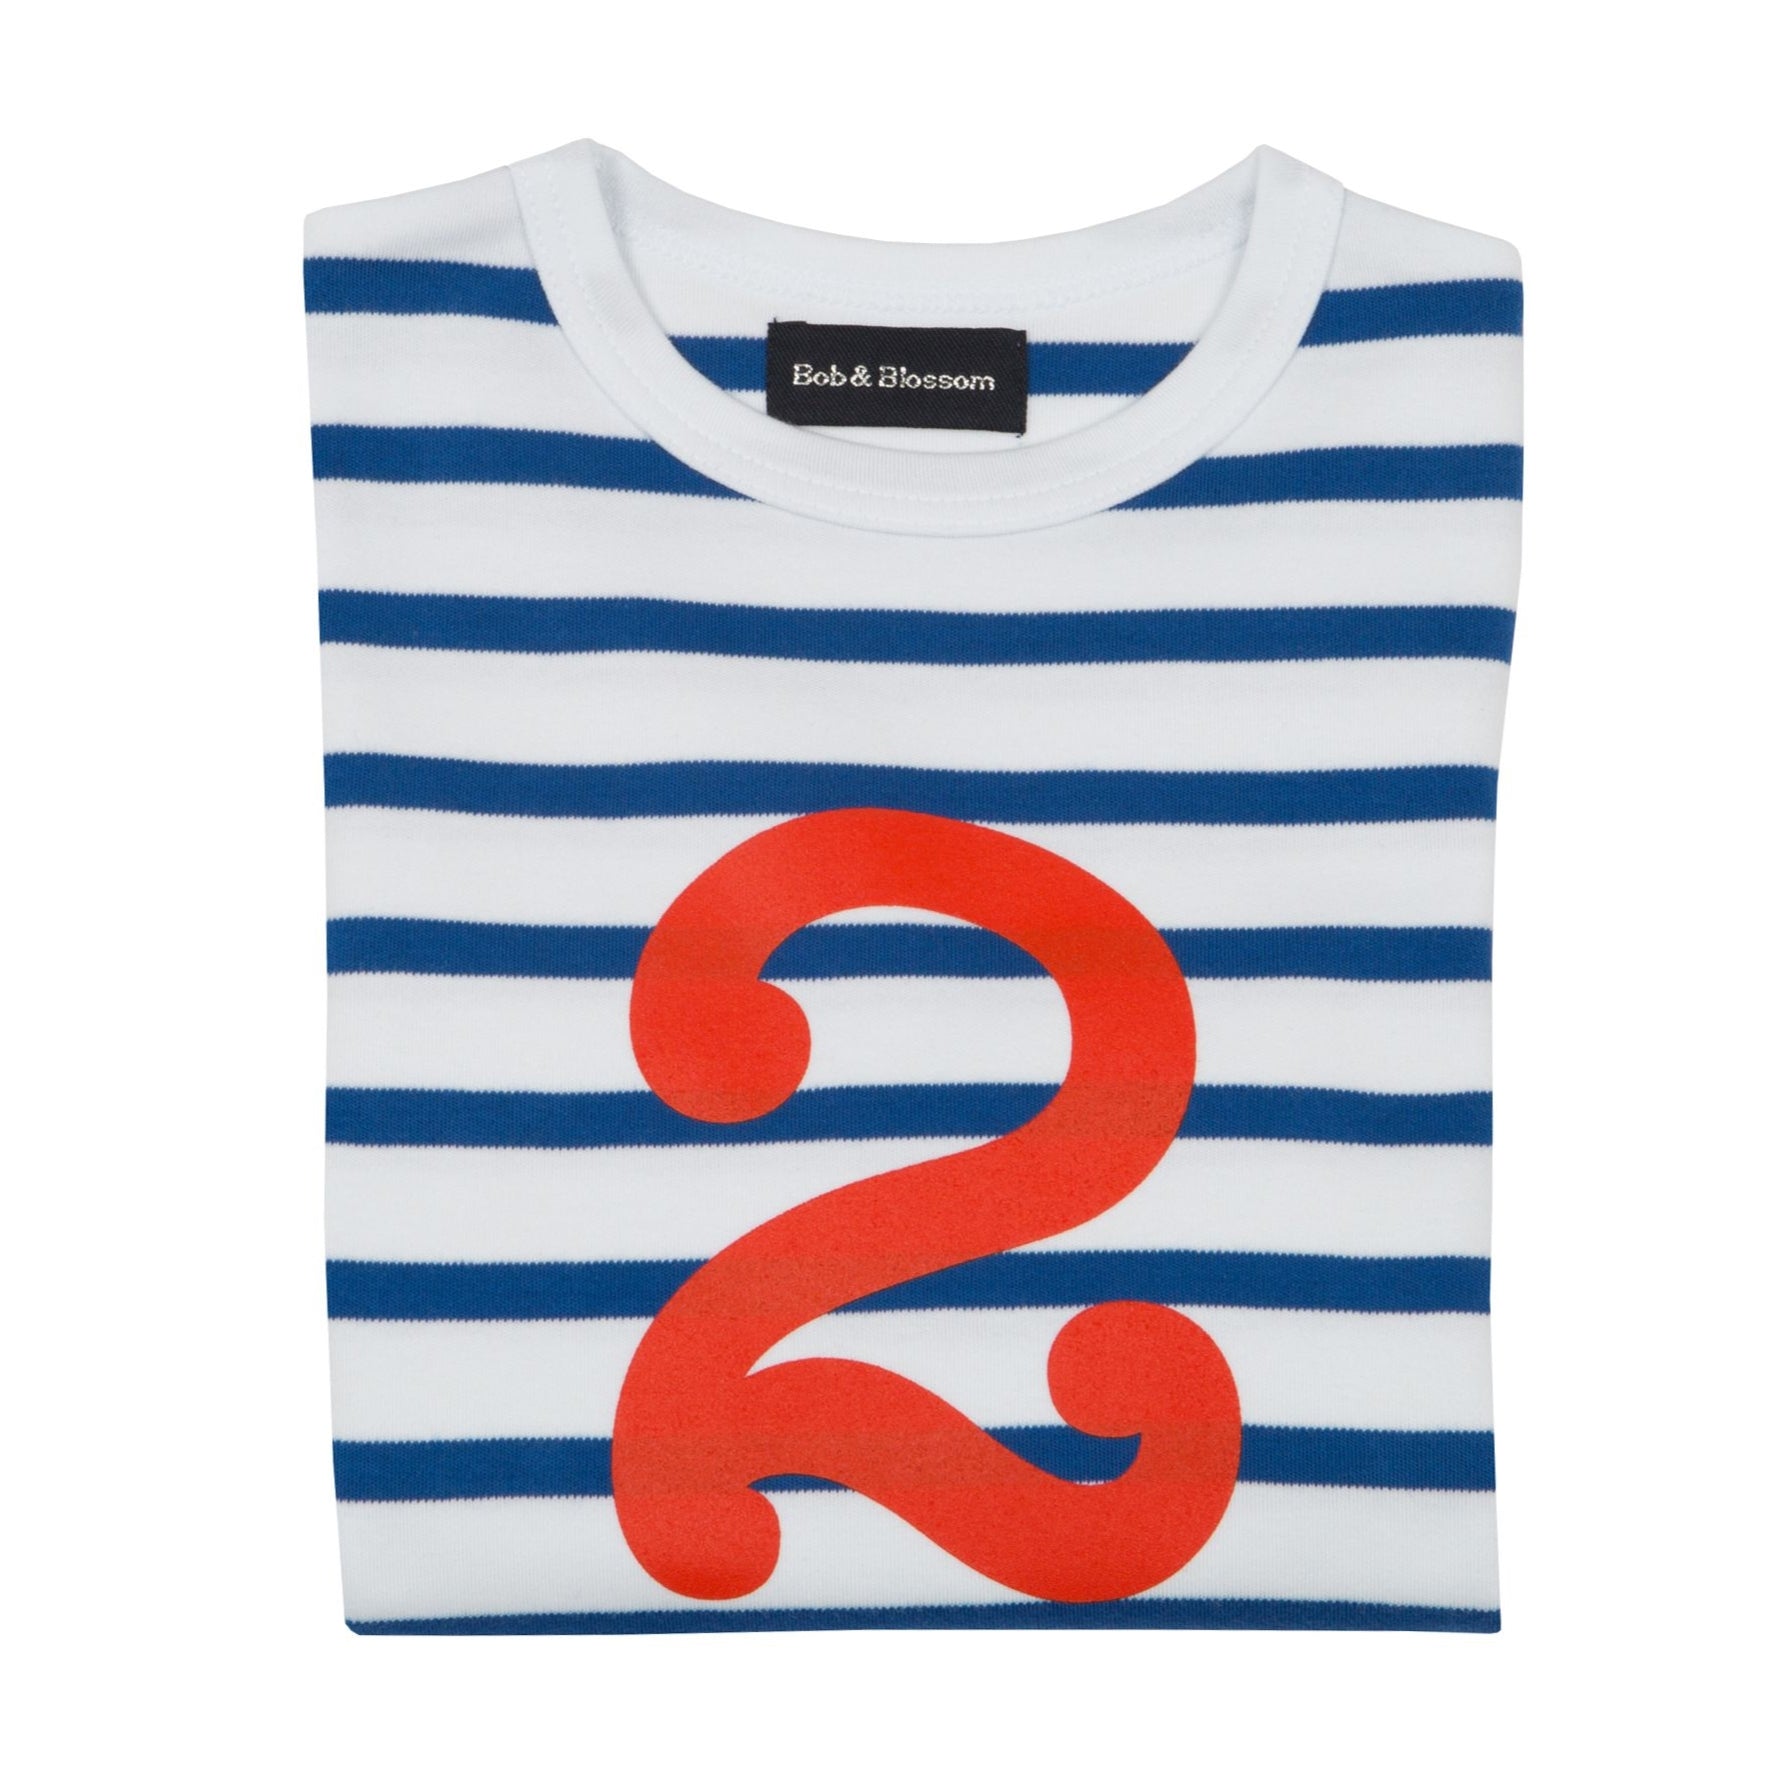 french blue and white striped t shirt with bright red number 2 on the front